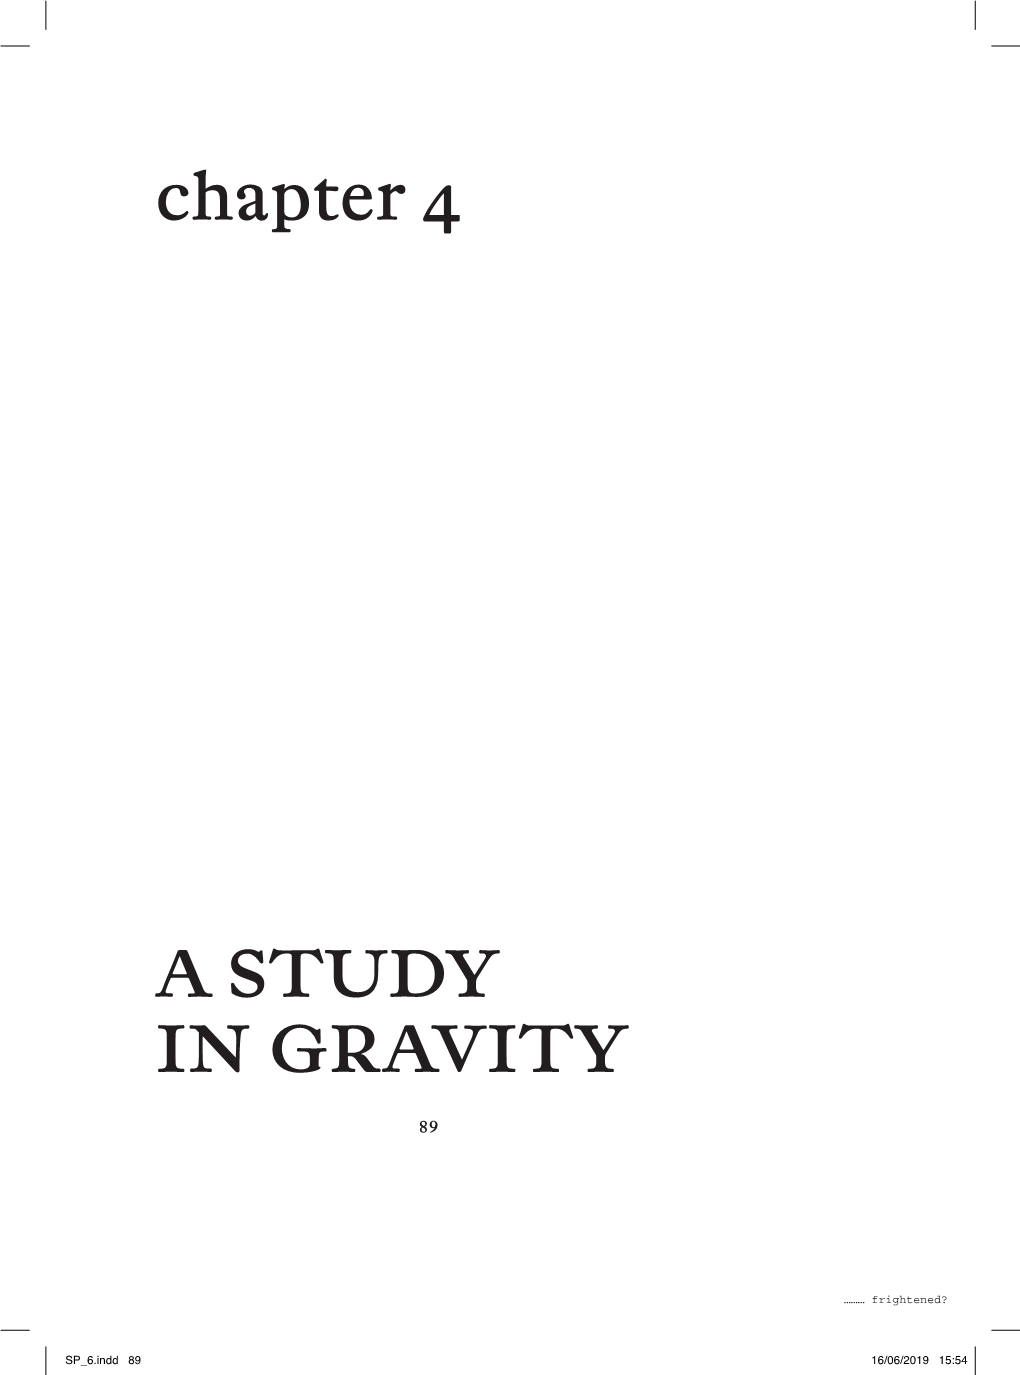 Chapter a STUDY in GRAVITY